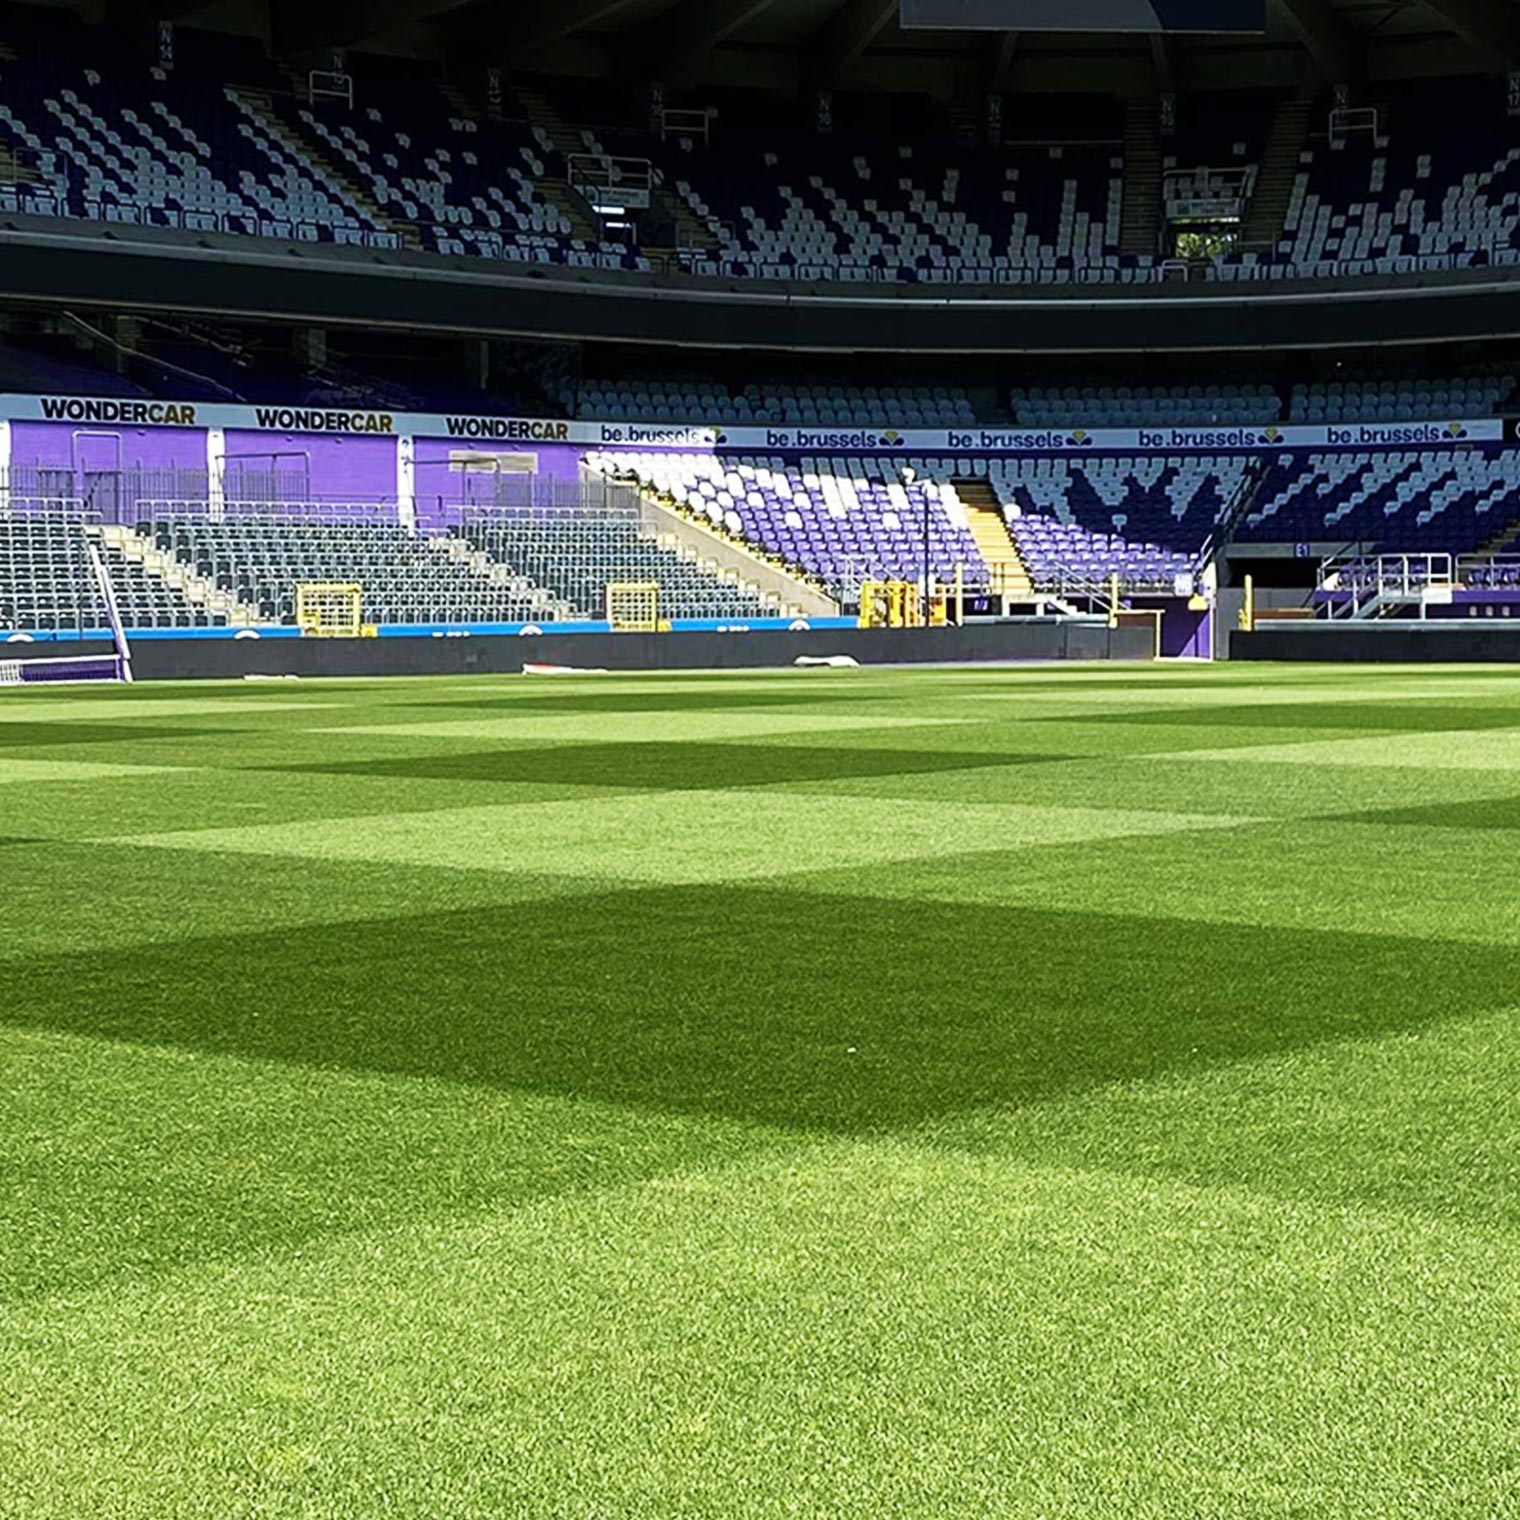 R.S.C. Anderlecht checks impact on consumers and fans with GfK Belgium